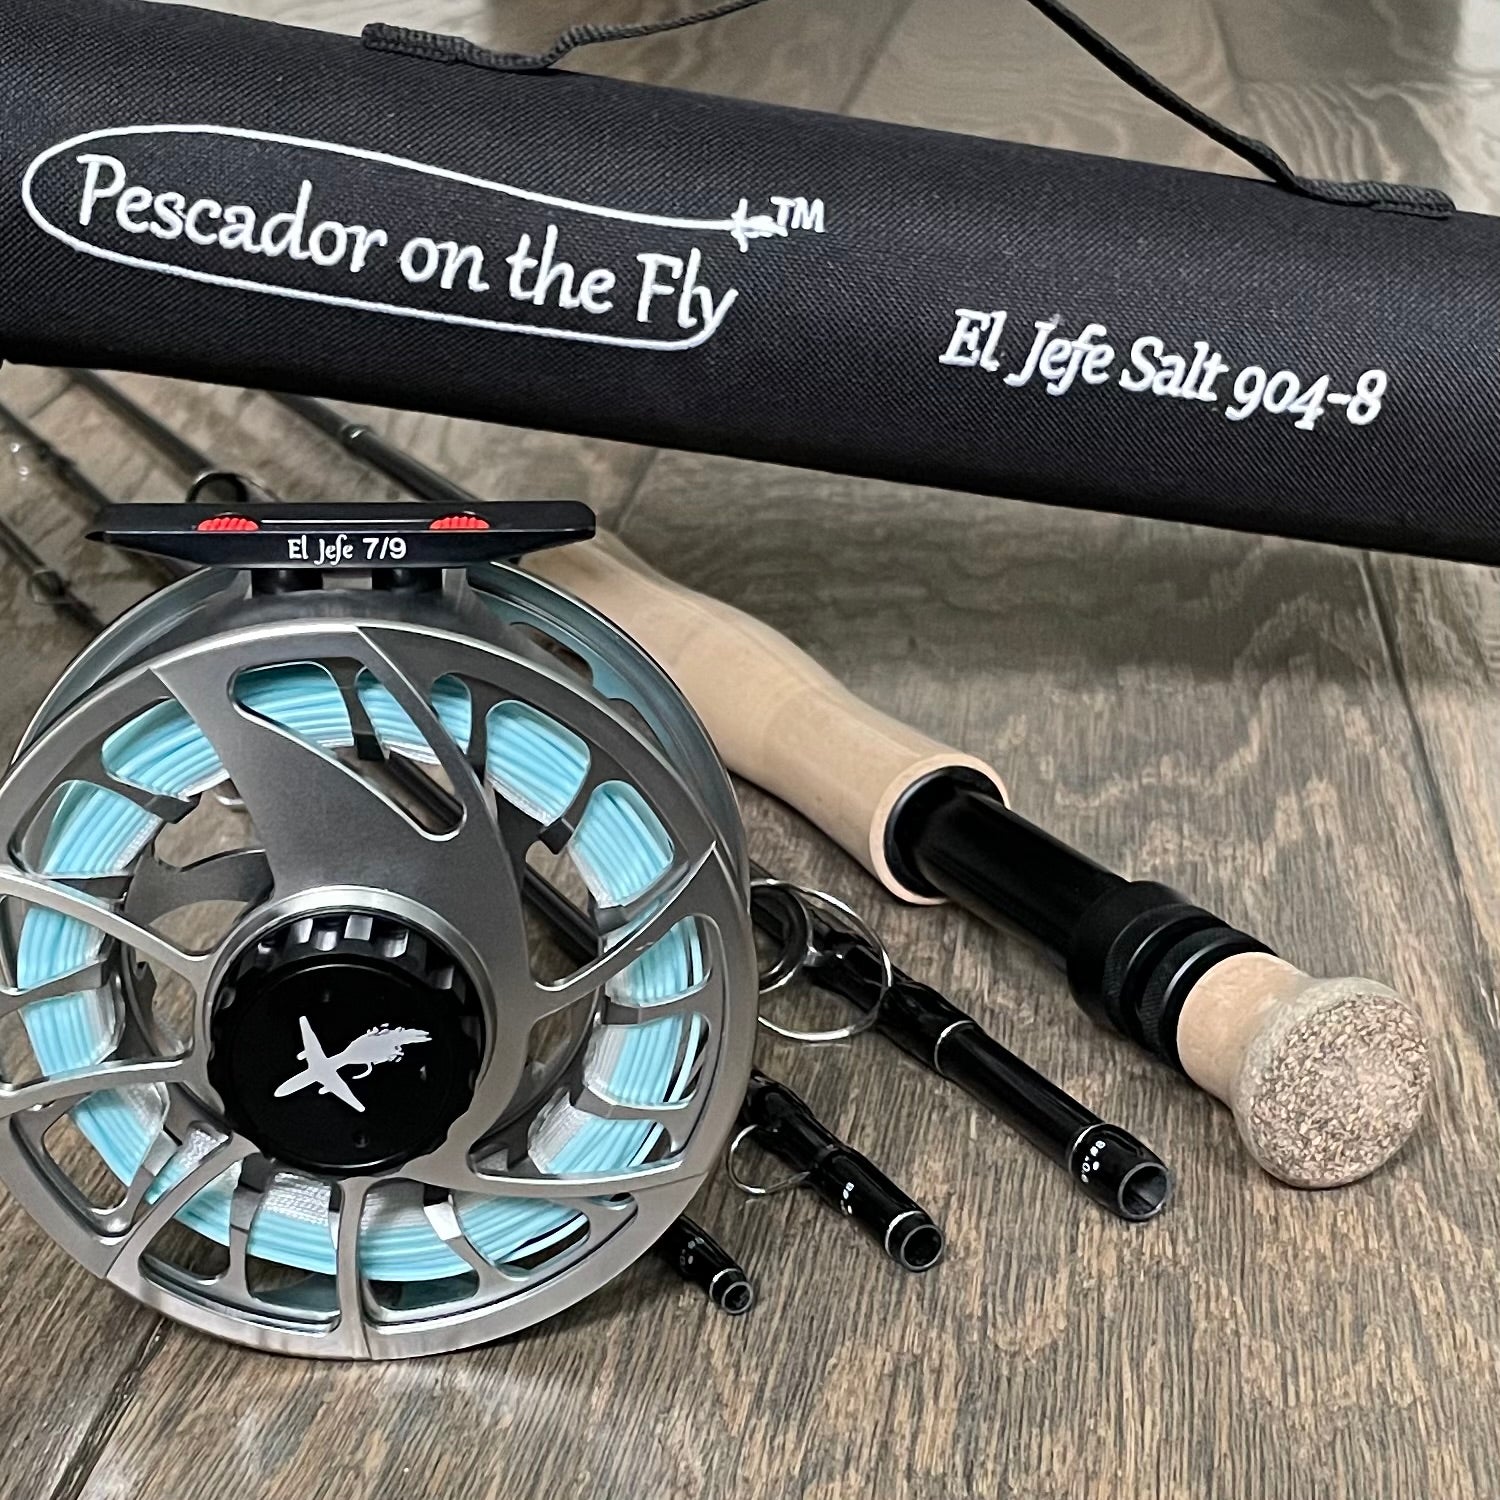 Airflo Saltwater Rods and Combos - 8wt, 9wt and 10wt – essential Flyfisher